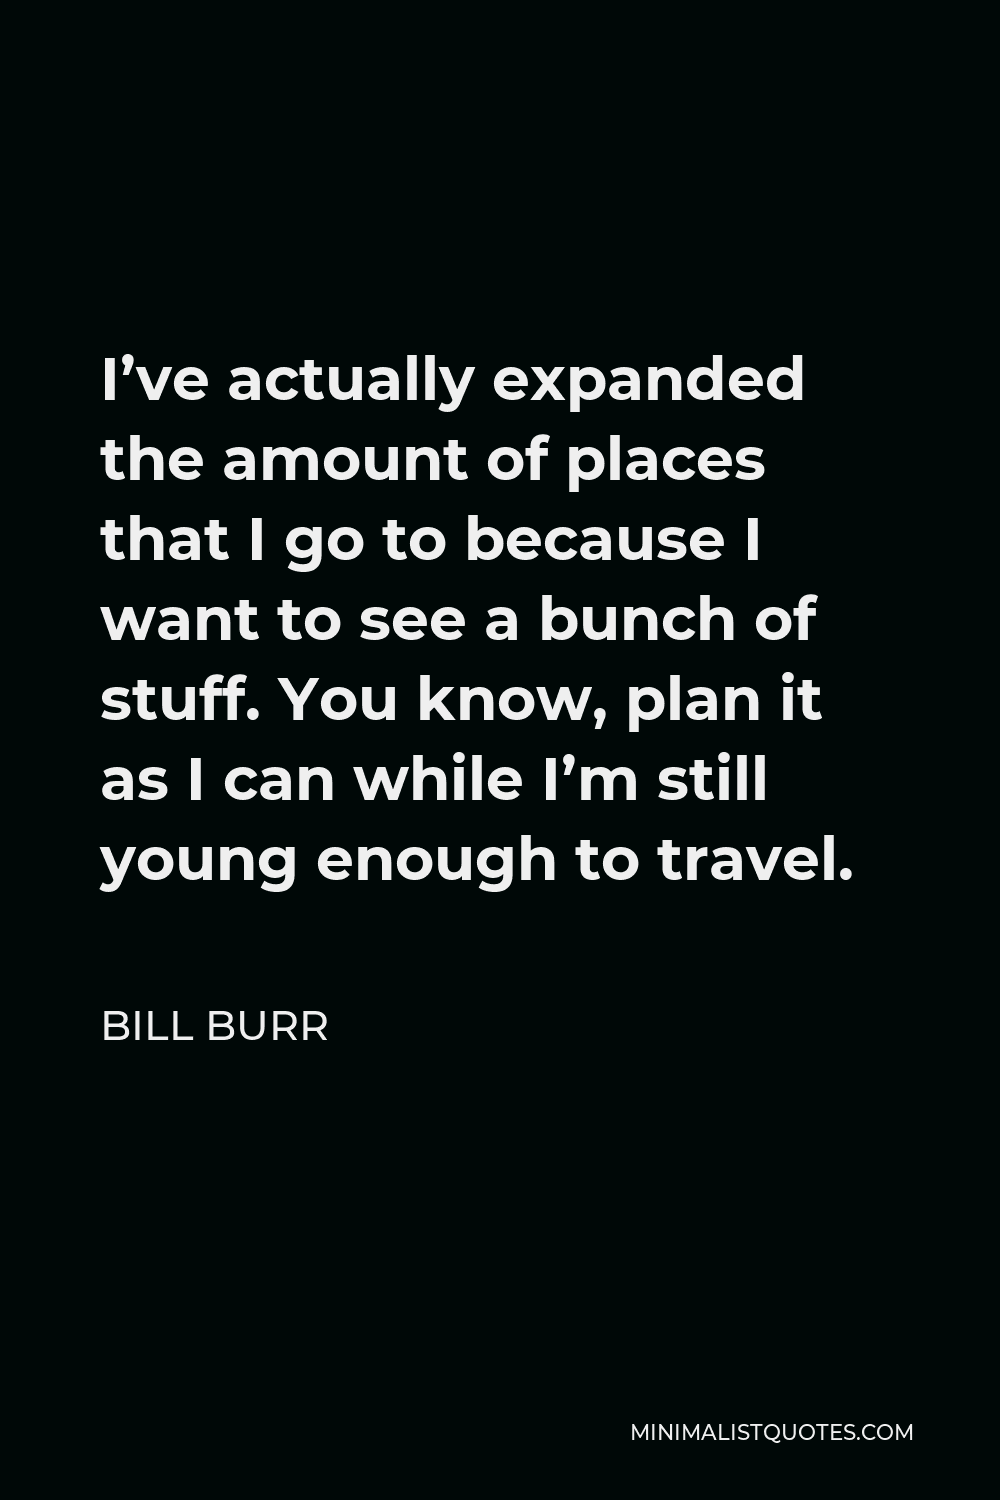 Bill Burr Quote - I’ve actually expanded the amount of places that I go to because I want to see a bunch of stuff. You know, plan it as I can while I’m still young enough to travel.